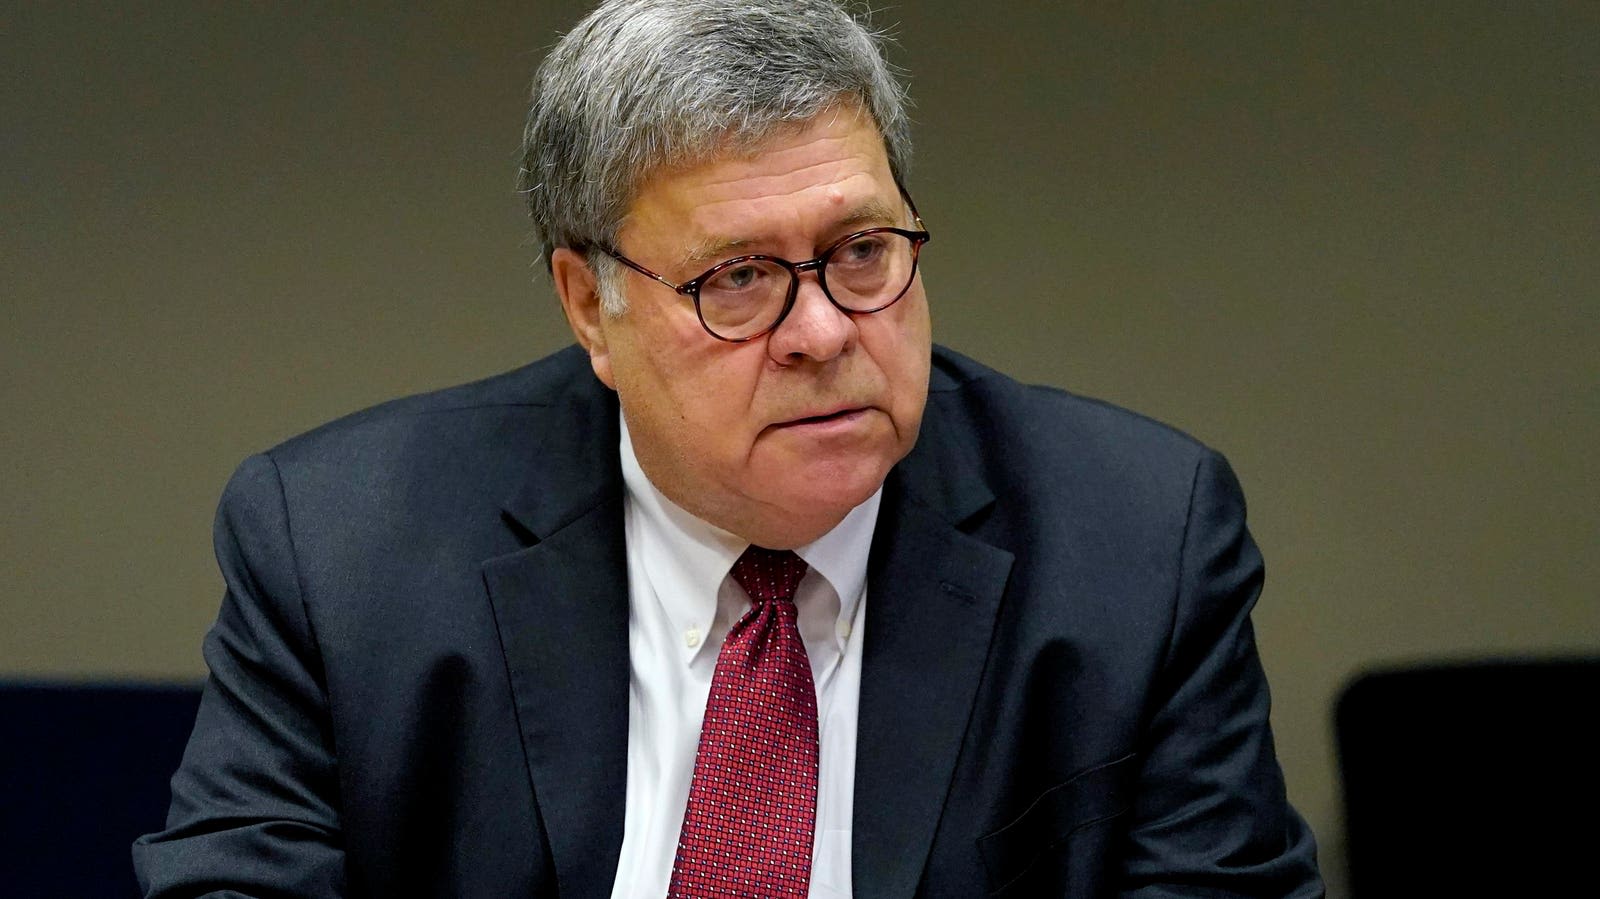 If William Barr Could Detect ‘Budding’ Monopolies, He Wouldn’t